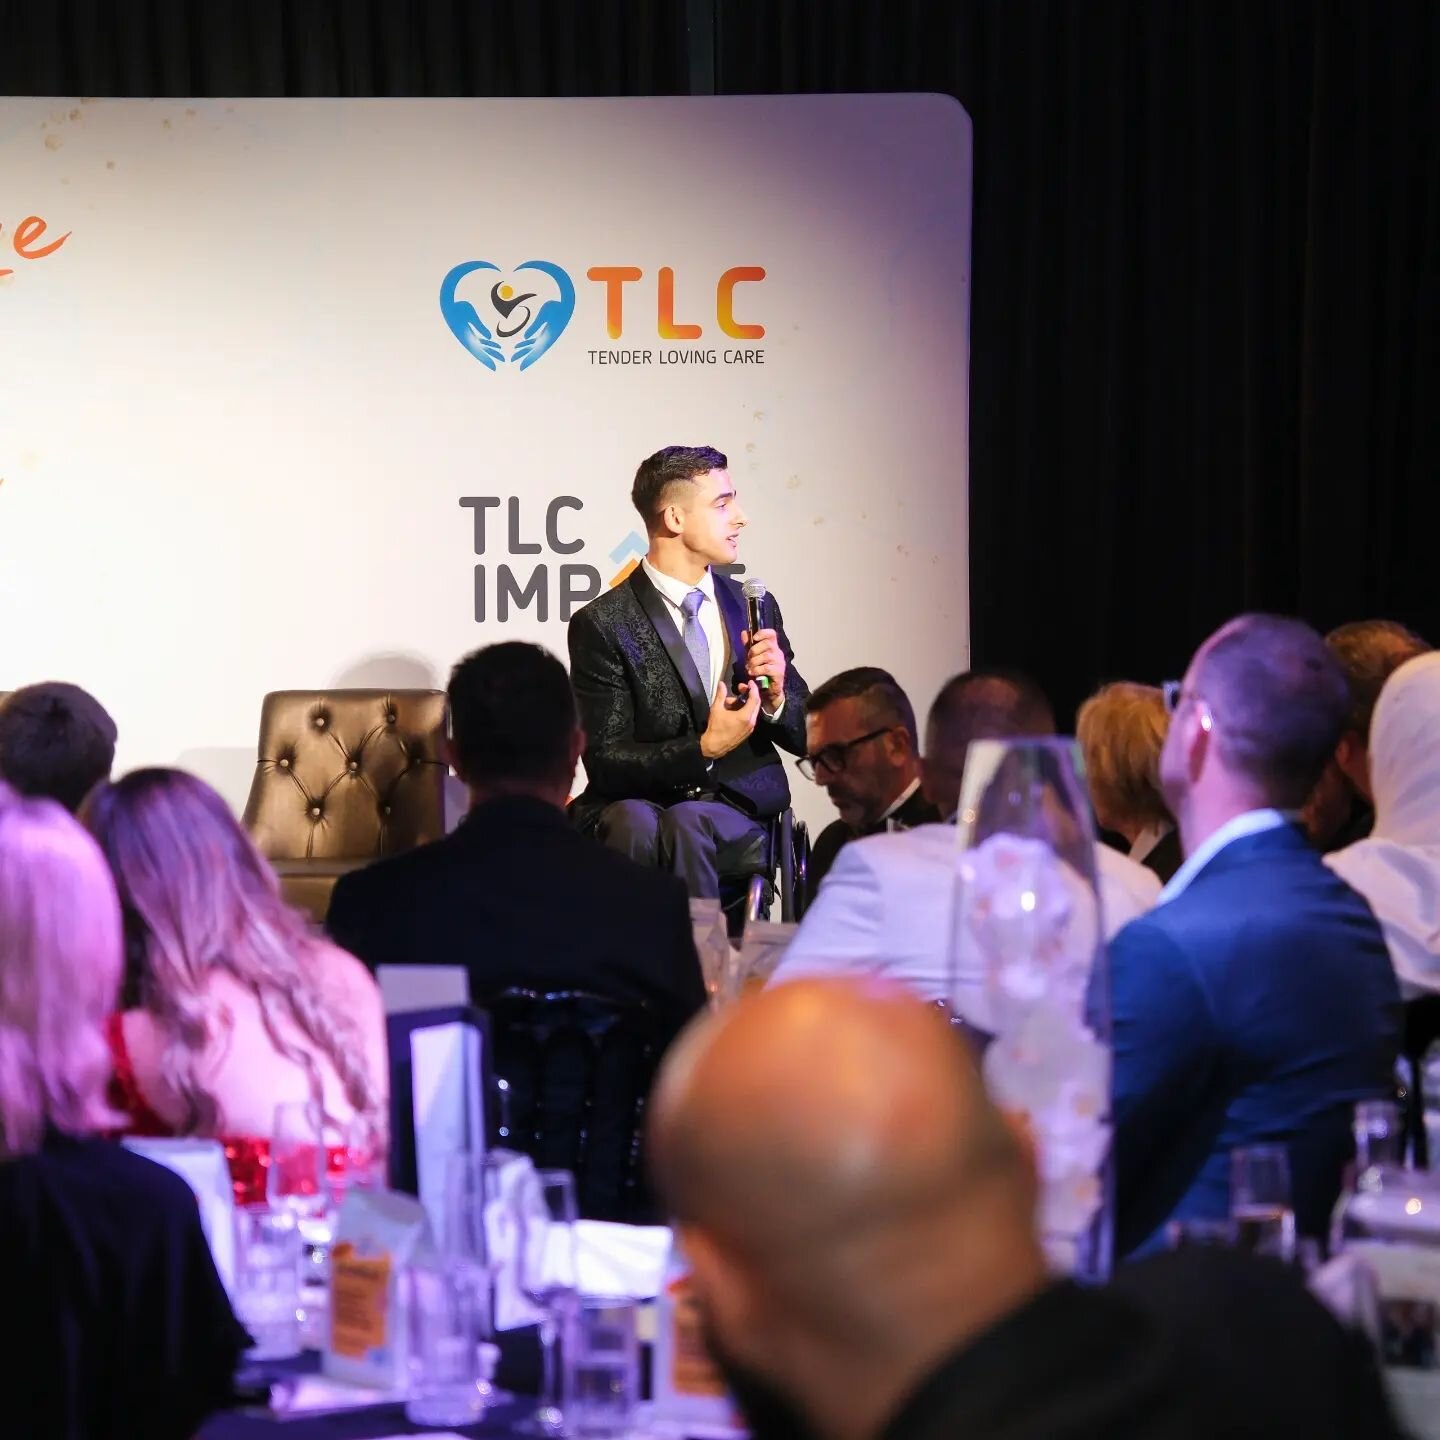 It was an honour to have shared at the TLC Impact Launch, &quot;Ignite Change Through Connection.&quot;

Being four weeks since the event, the launch lived up its name as some of the conversations I had that night are still being deepened to (hopeful